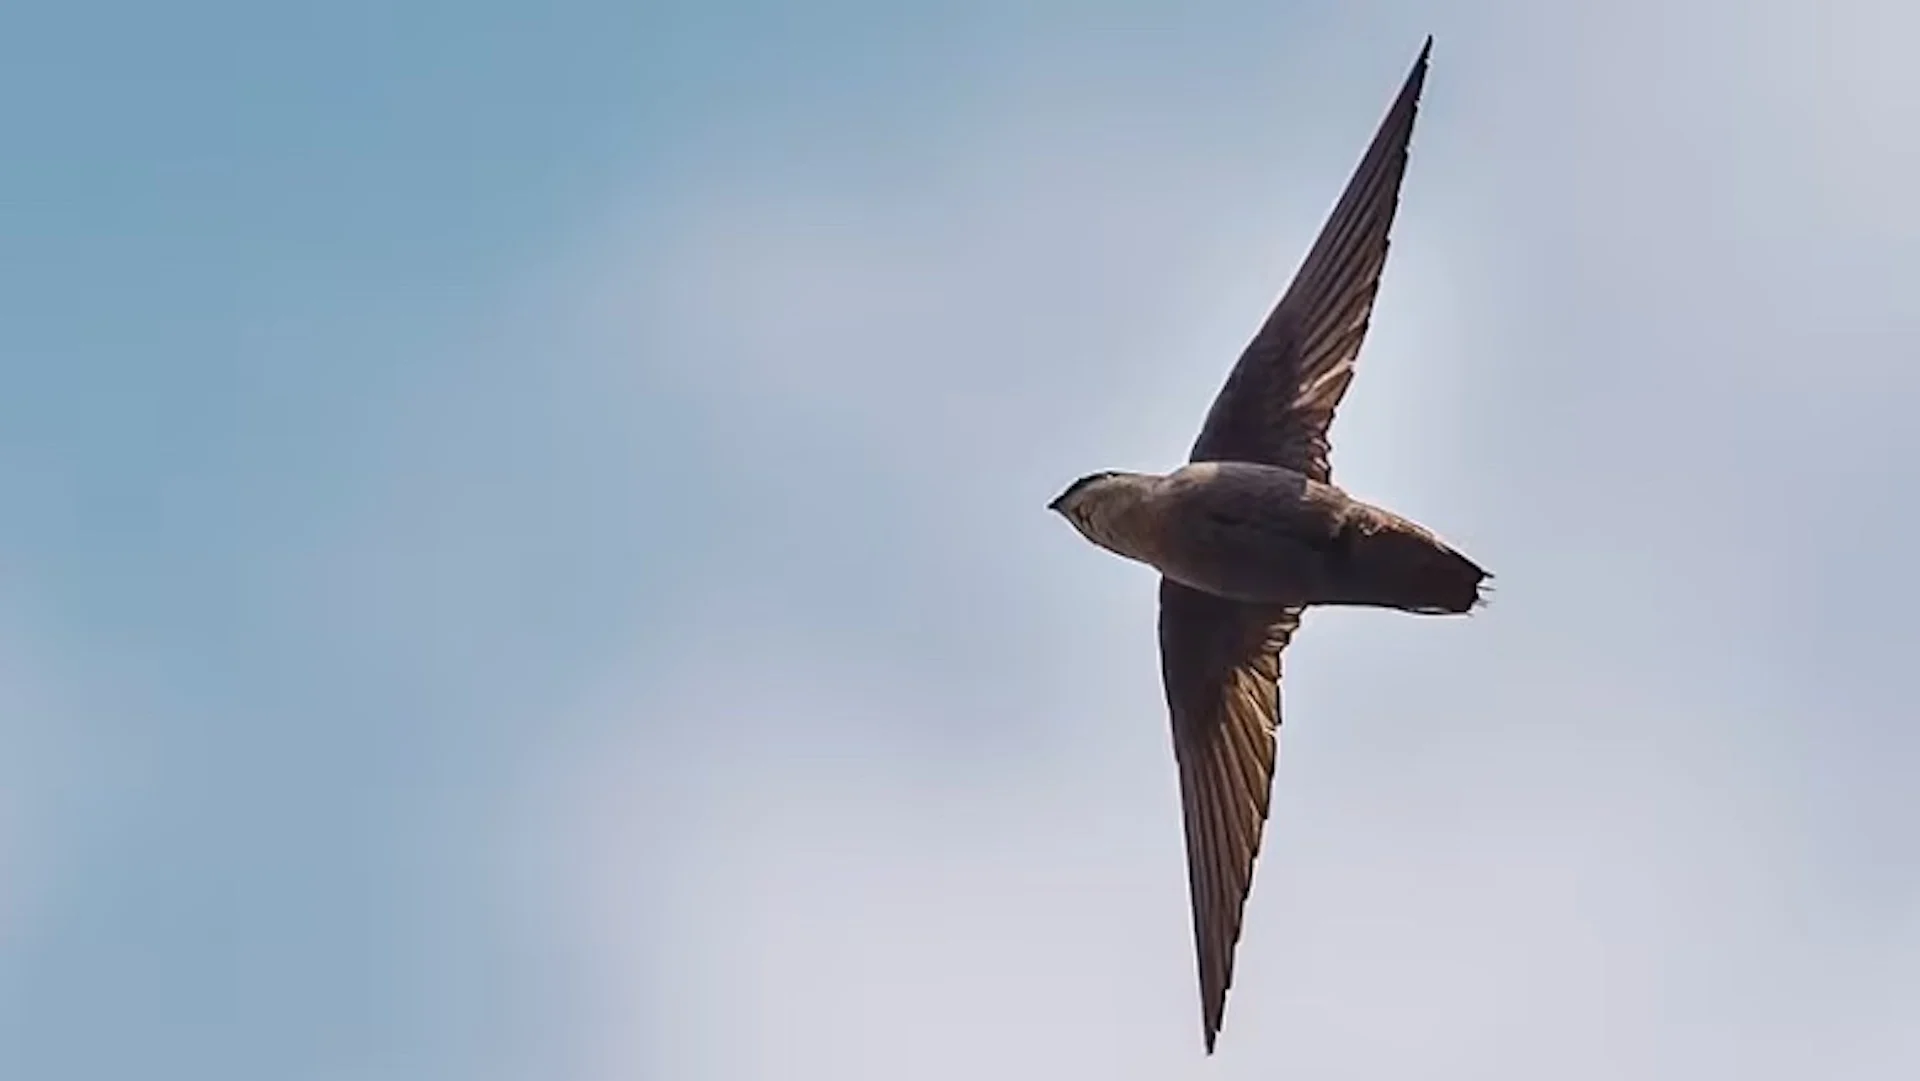 Swifts in the chimney: What to know about this threatened bird species